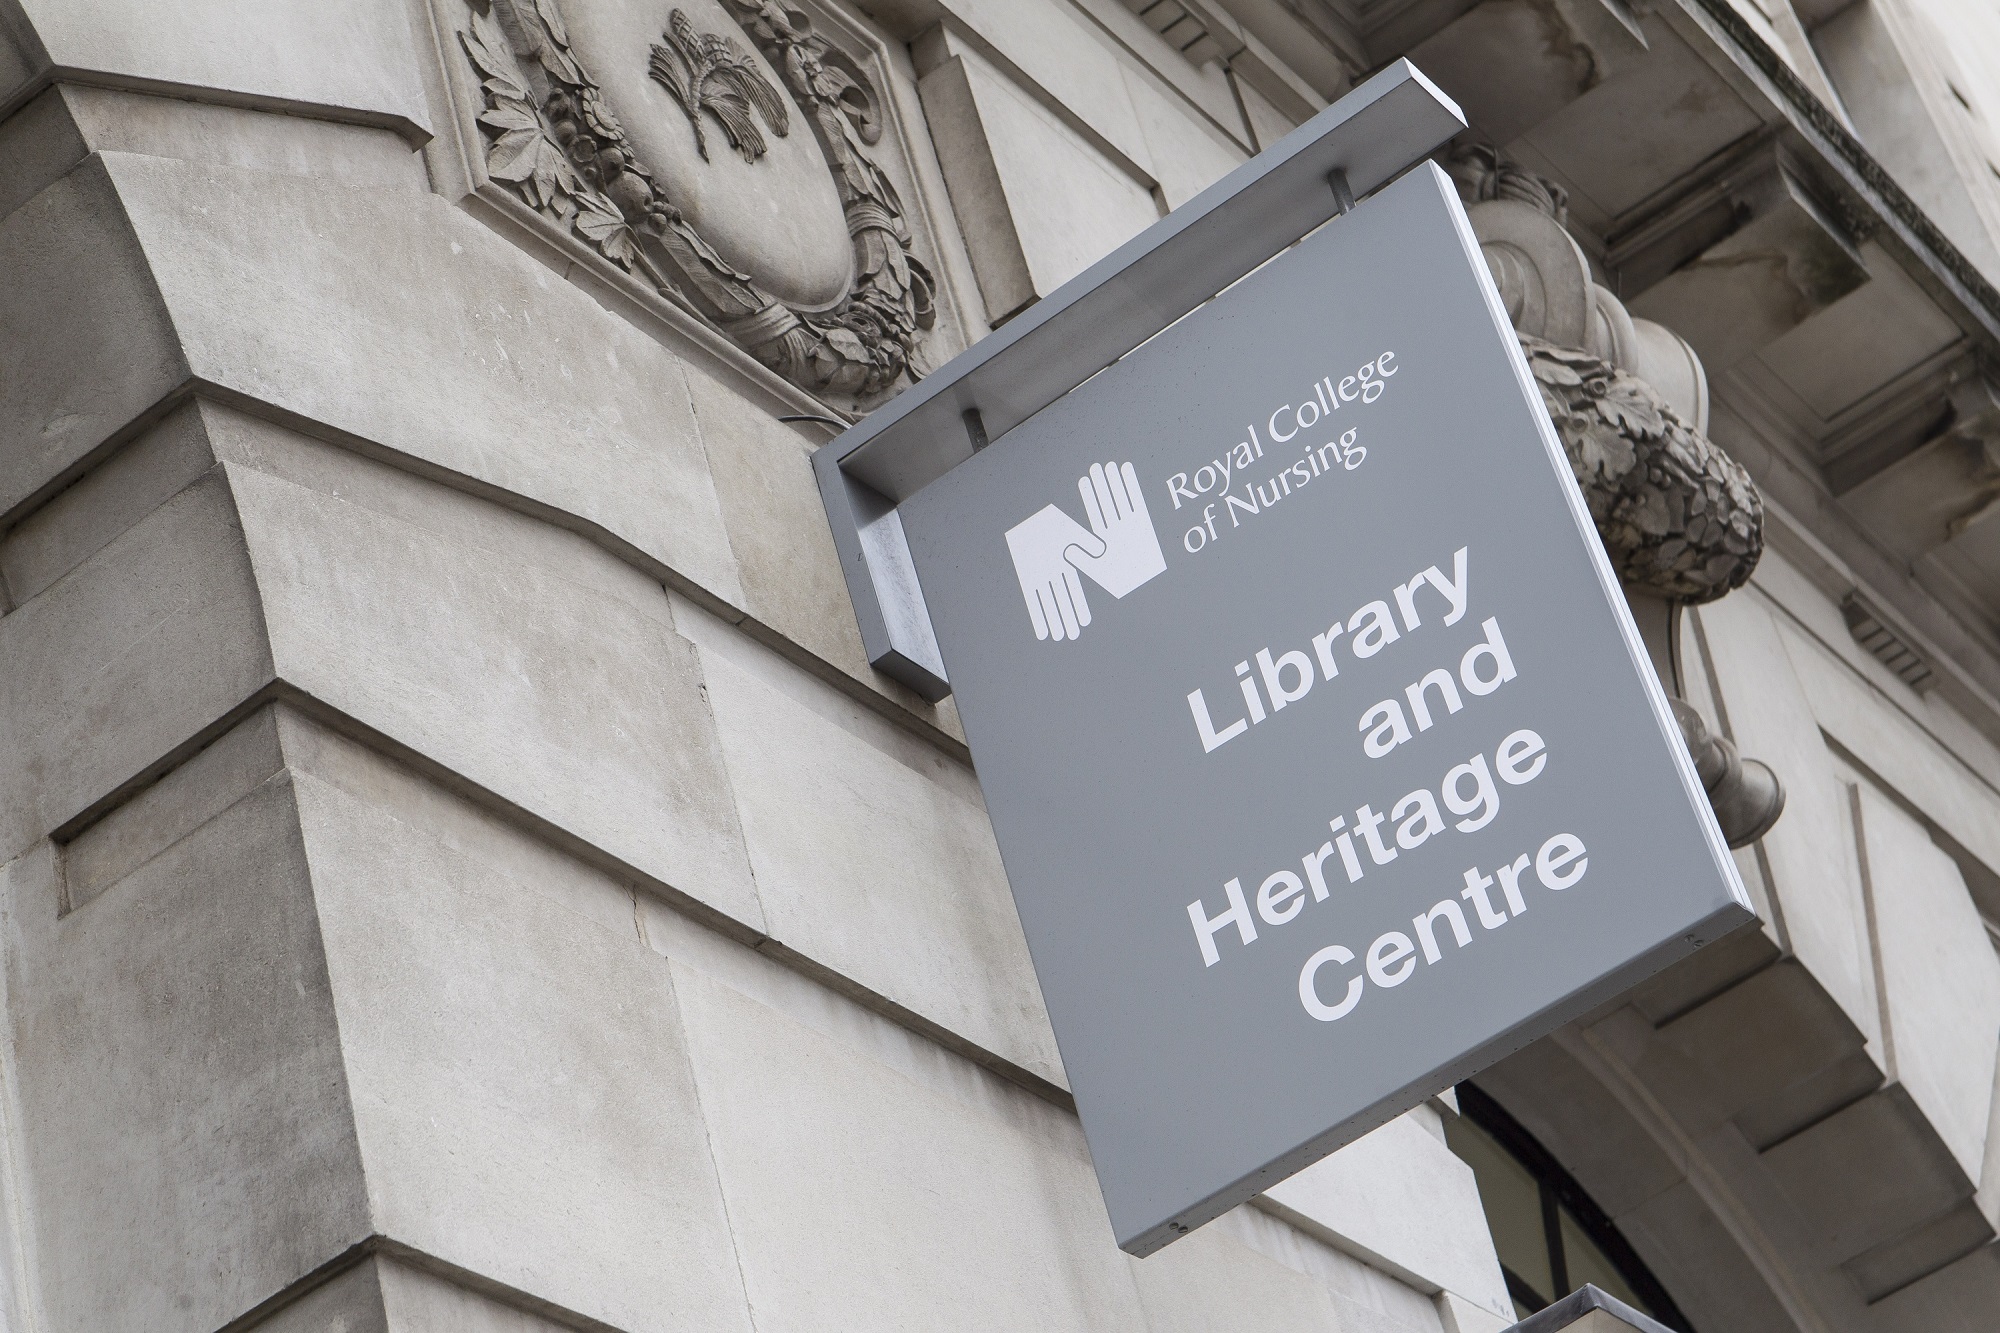 Close up of RCN Library and Heritage Centre sign